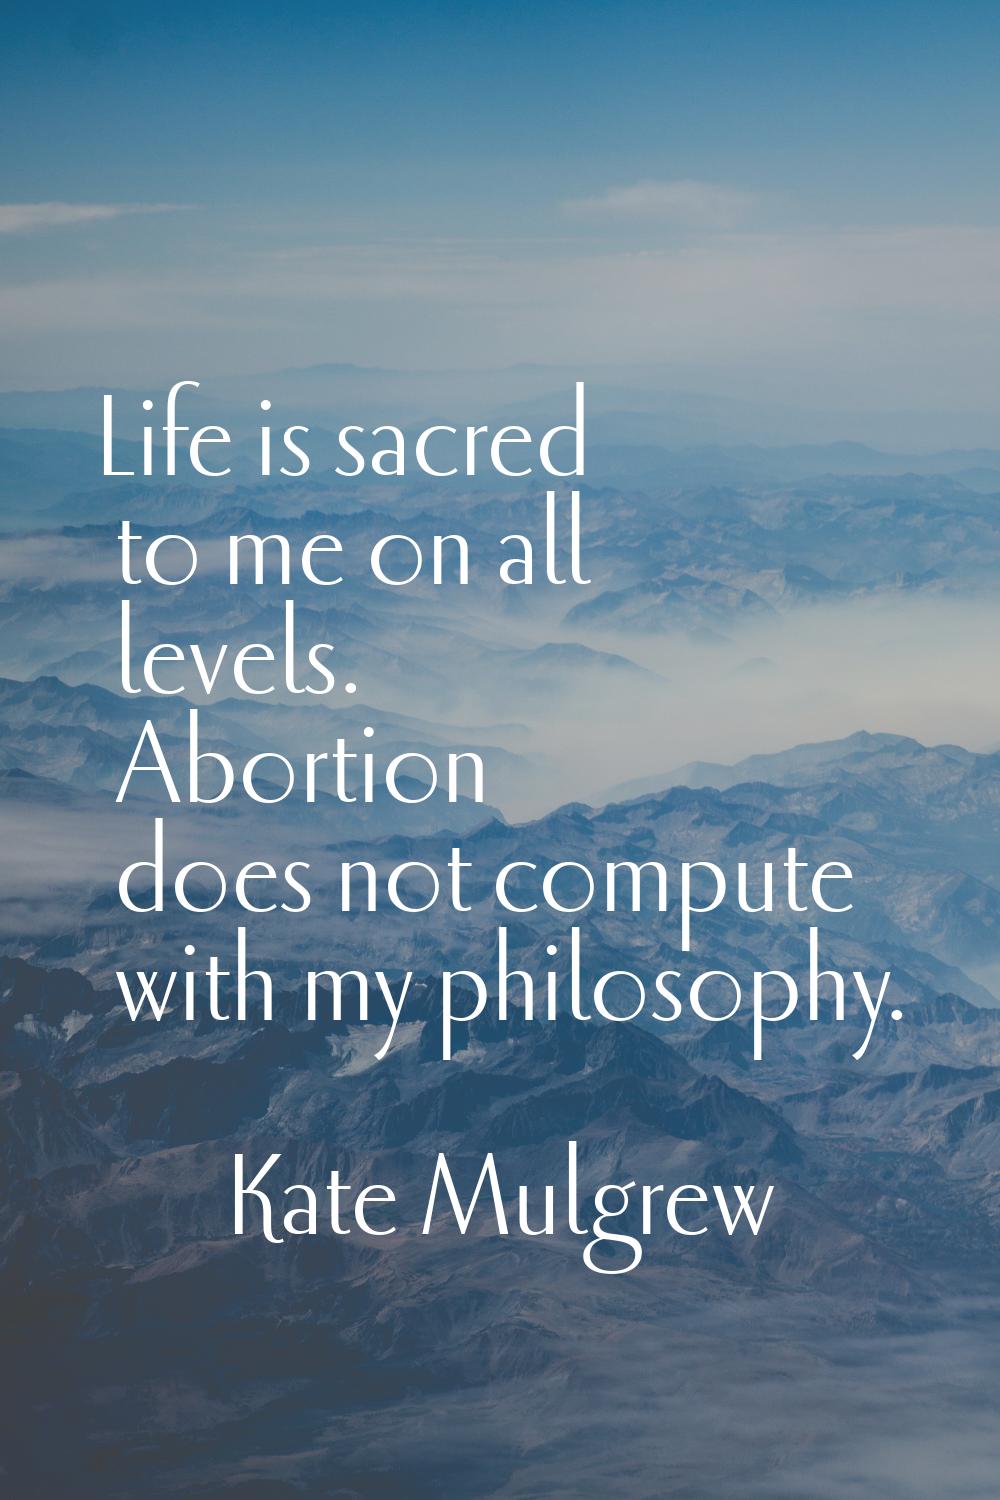 Life is sacred to me on all levels. Abortion does not compute with my philosophy.